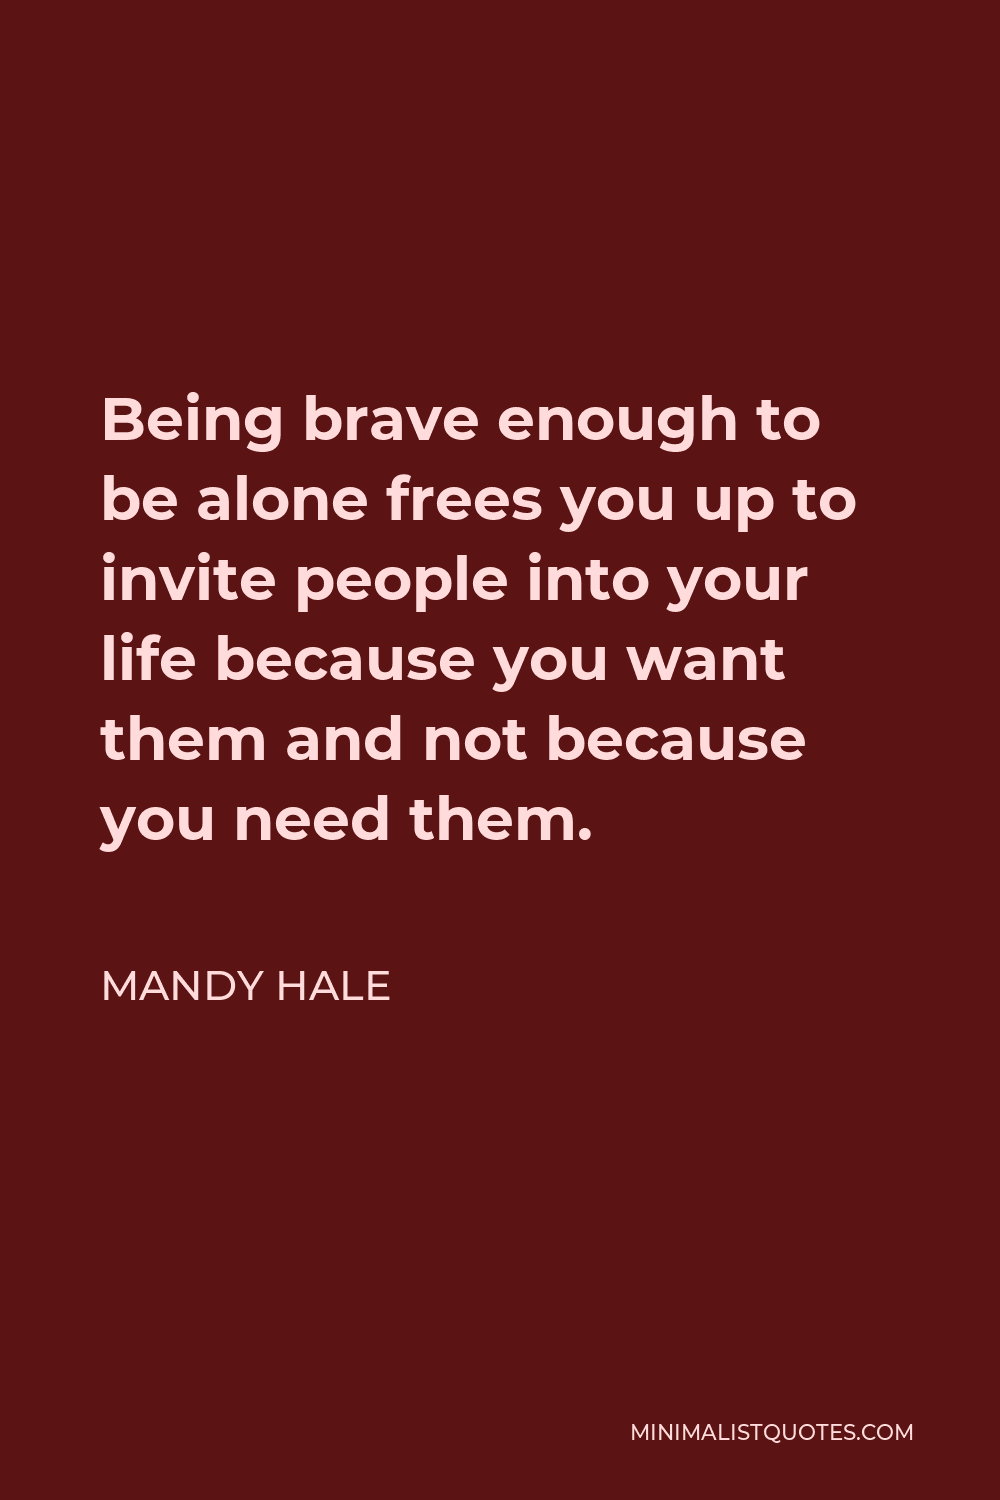 Mandy Hale Quote - Being brave enough to be alone frees you up to invite people into your life because you want them and not because you need them.